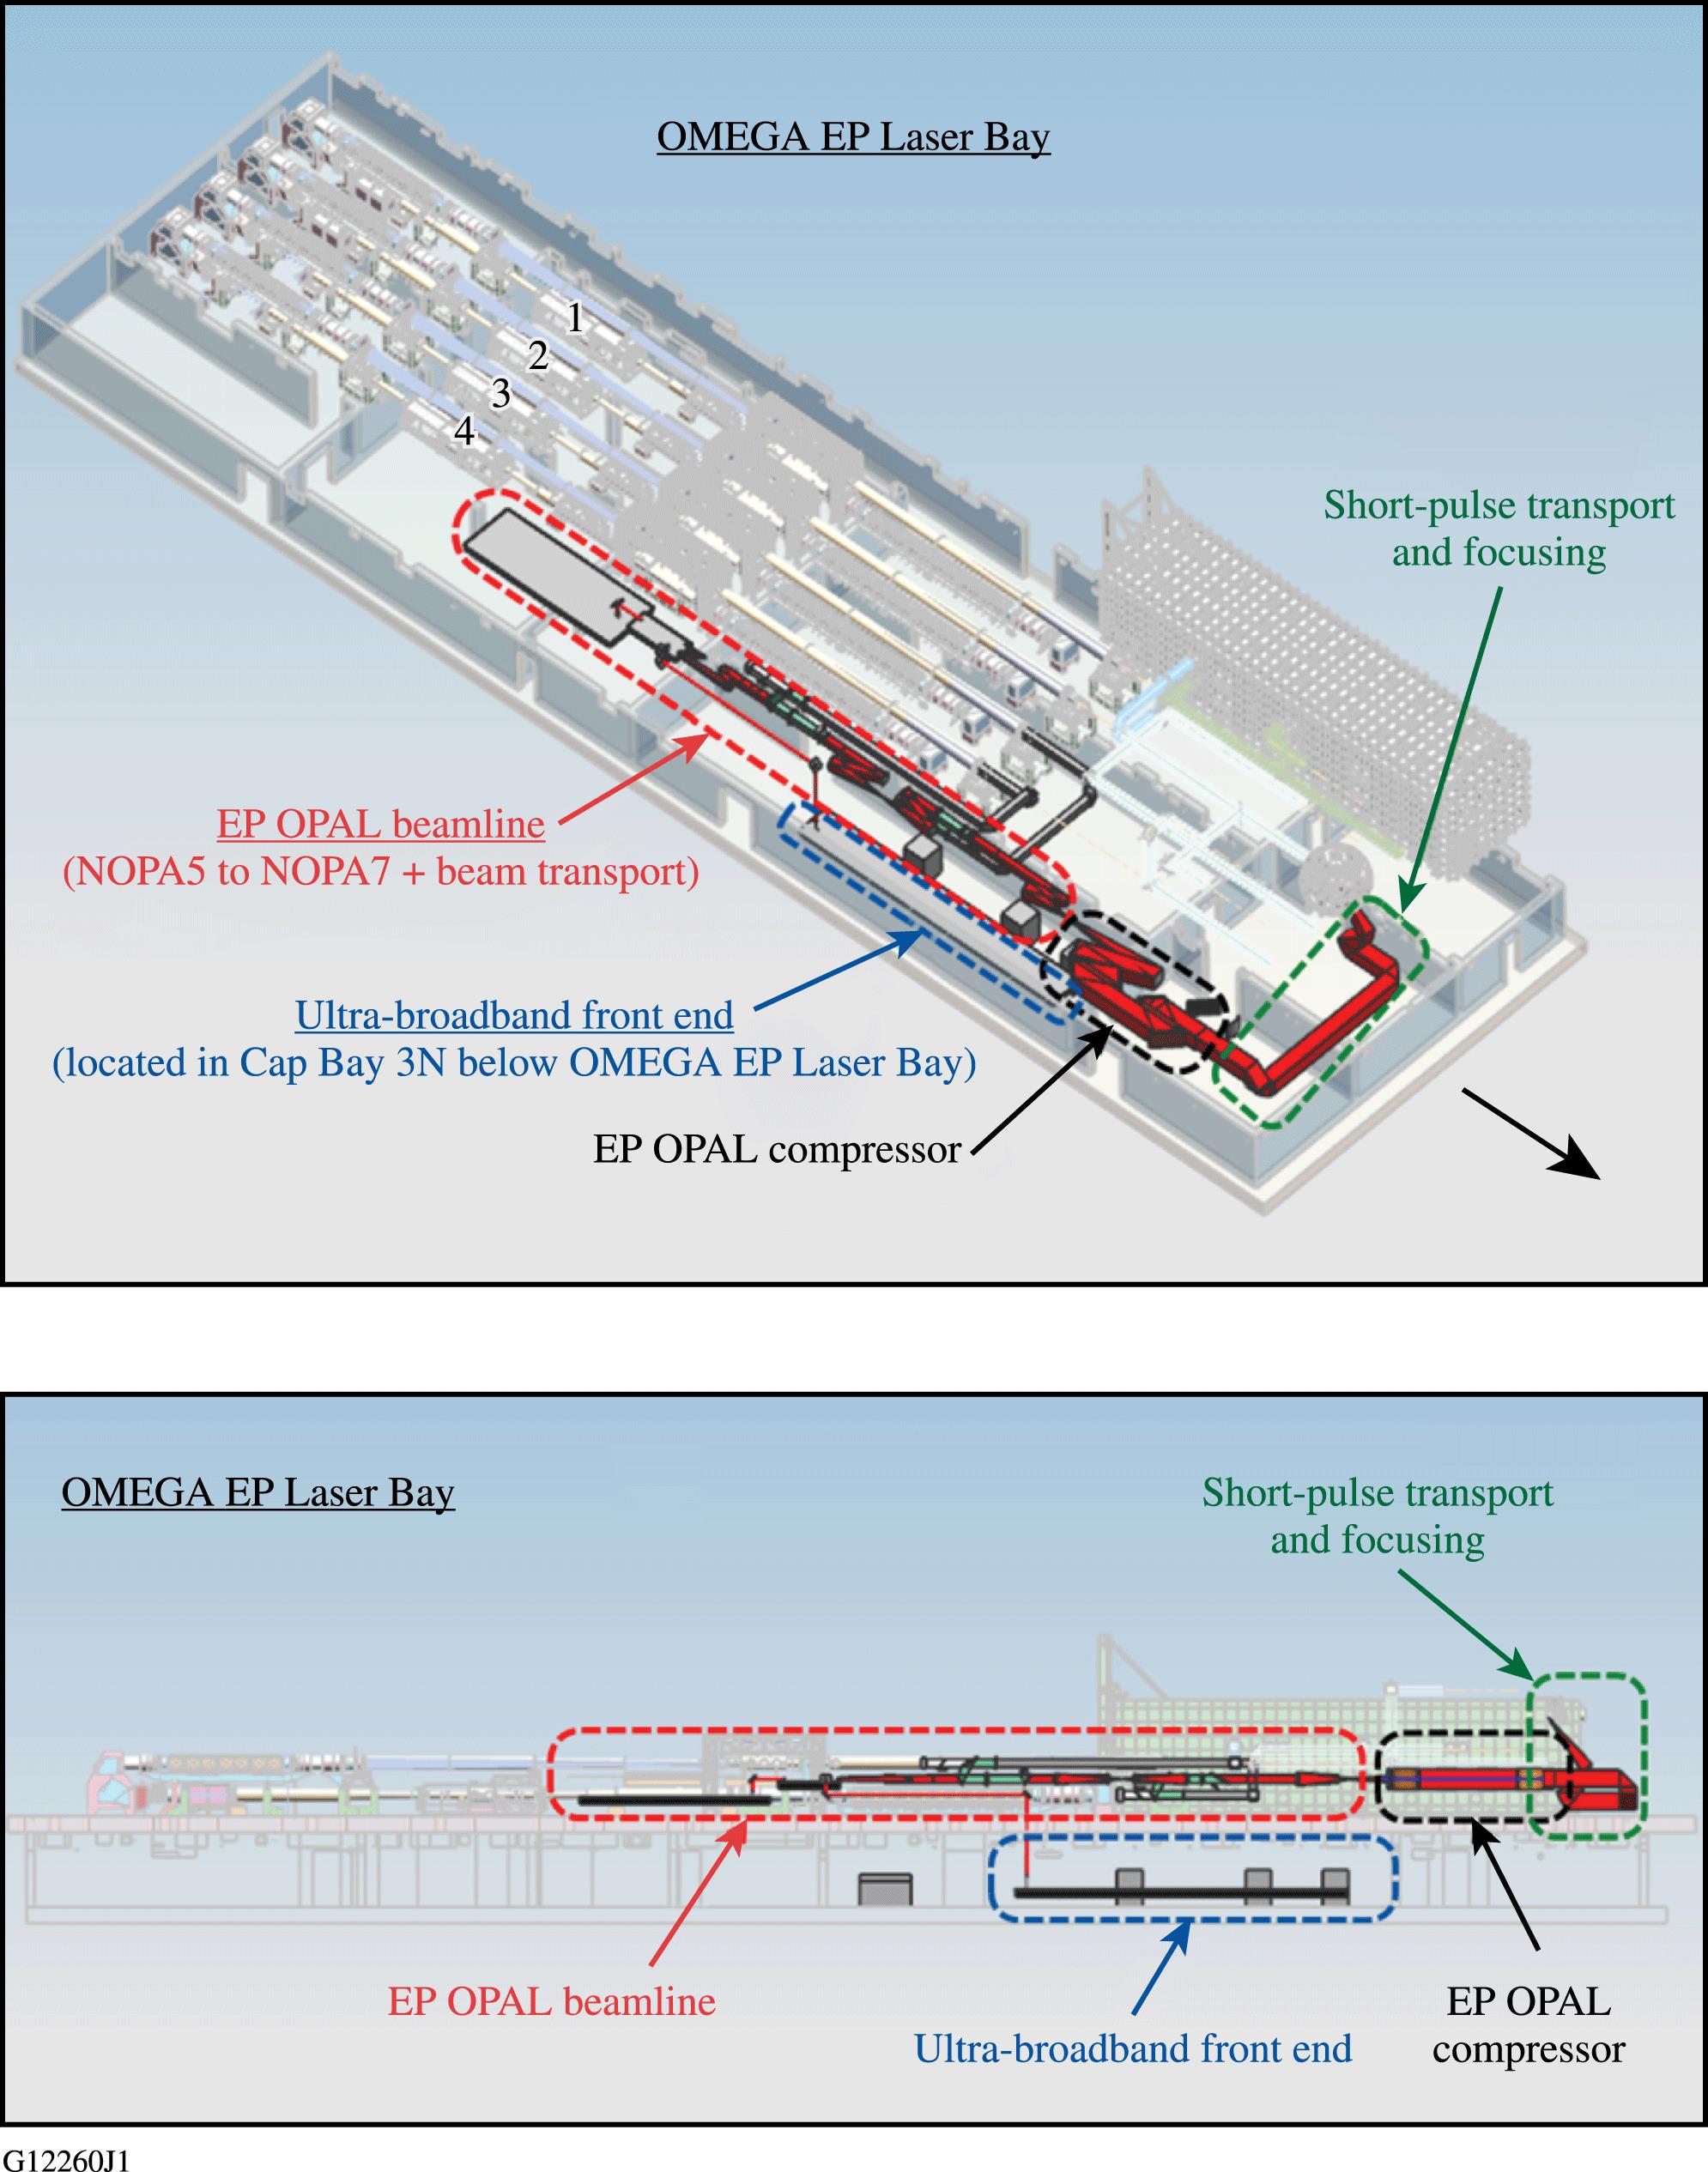 Isometric CAD views of the OMEGA EP Laser System, showing the locations of the main components of the EP OPAL system.